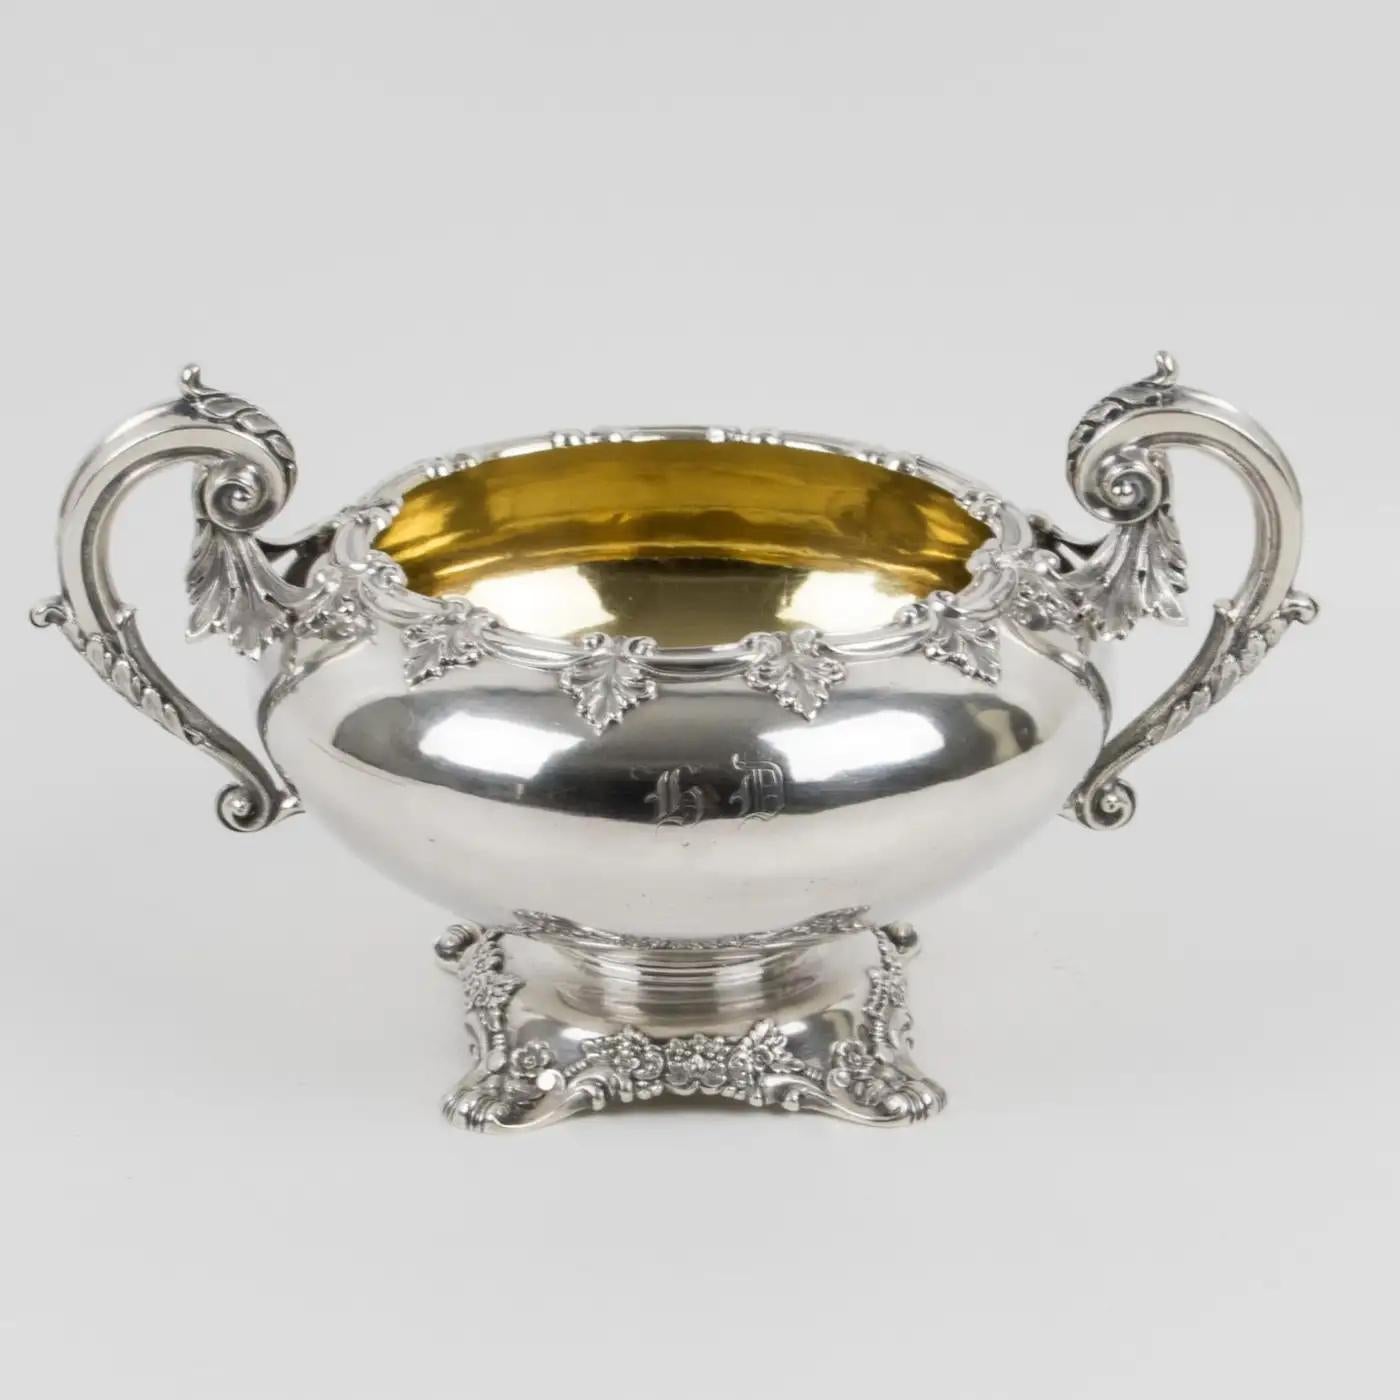 Gustave Odiot Paris 19th Century Sterling Silver Decorative Bowl For Sale 3